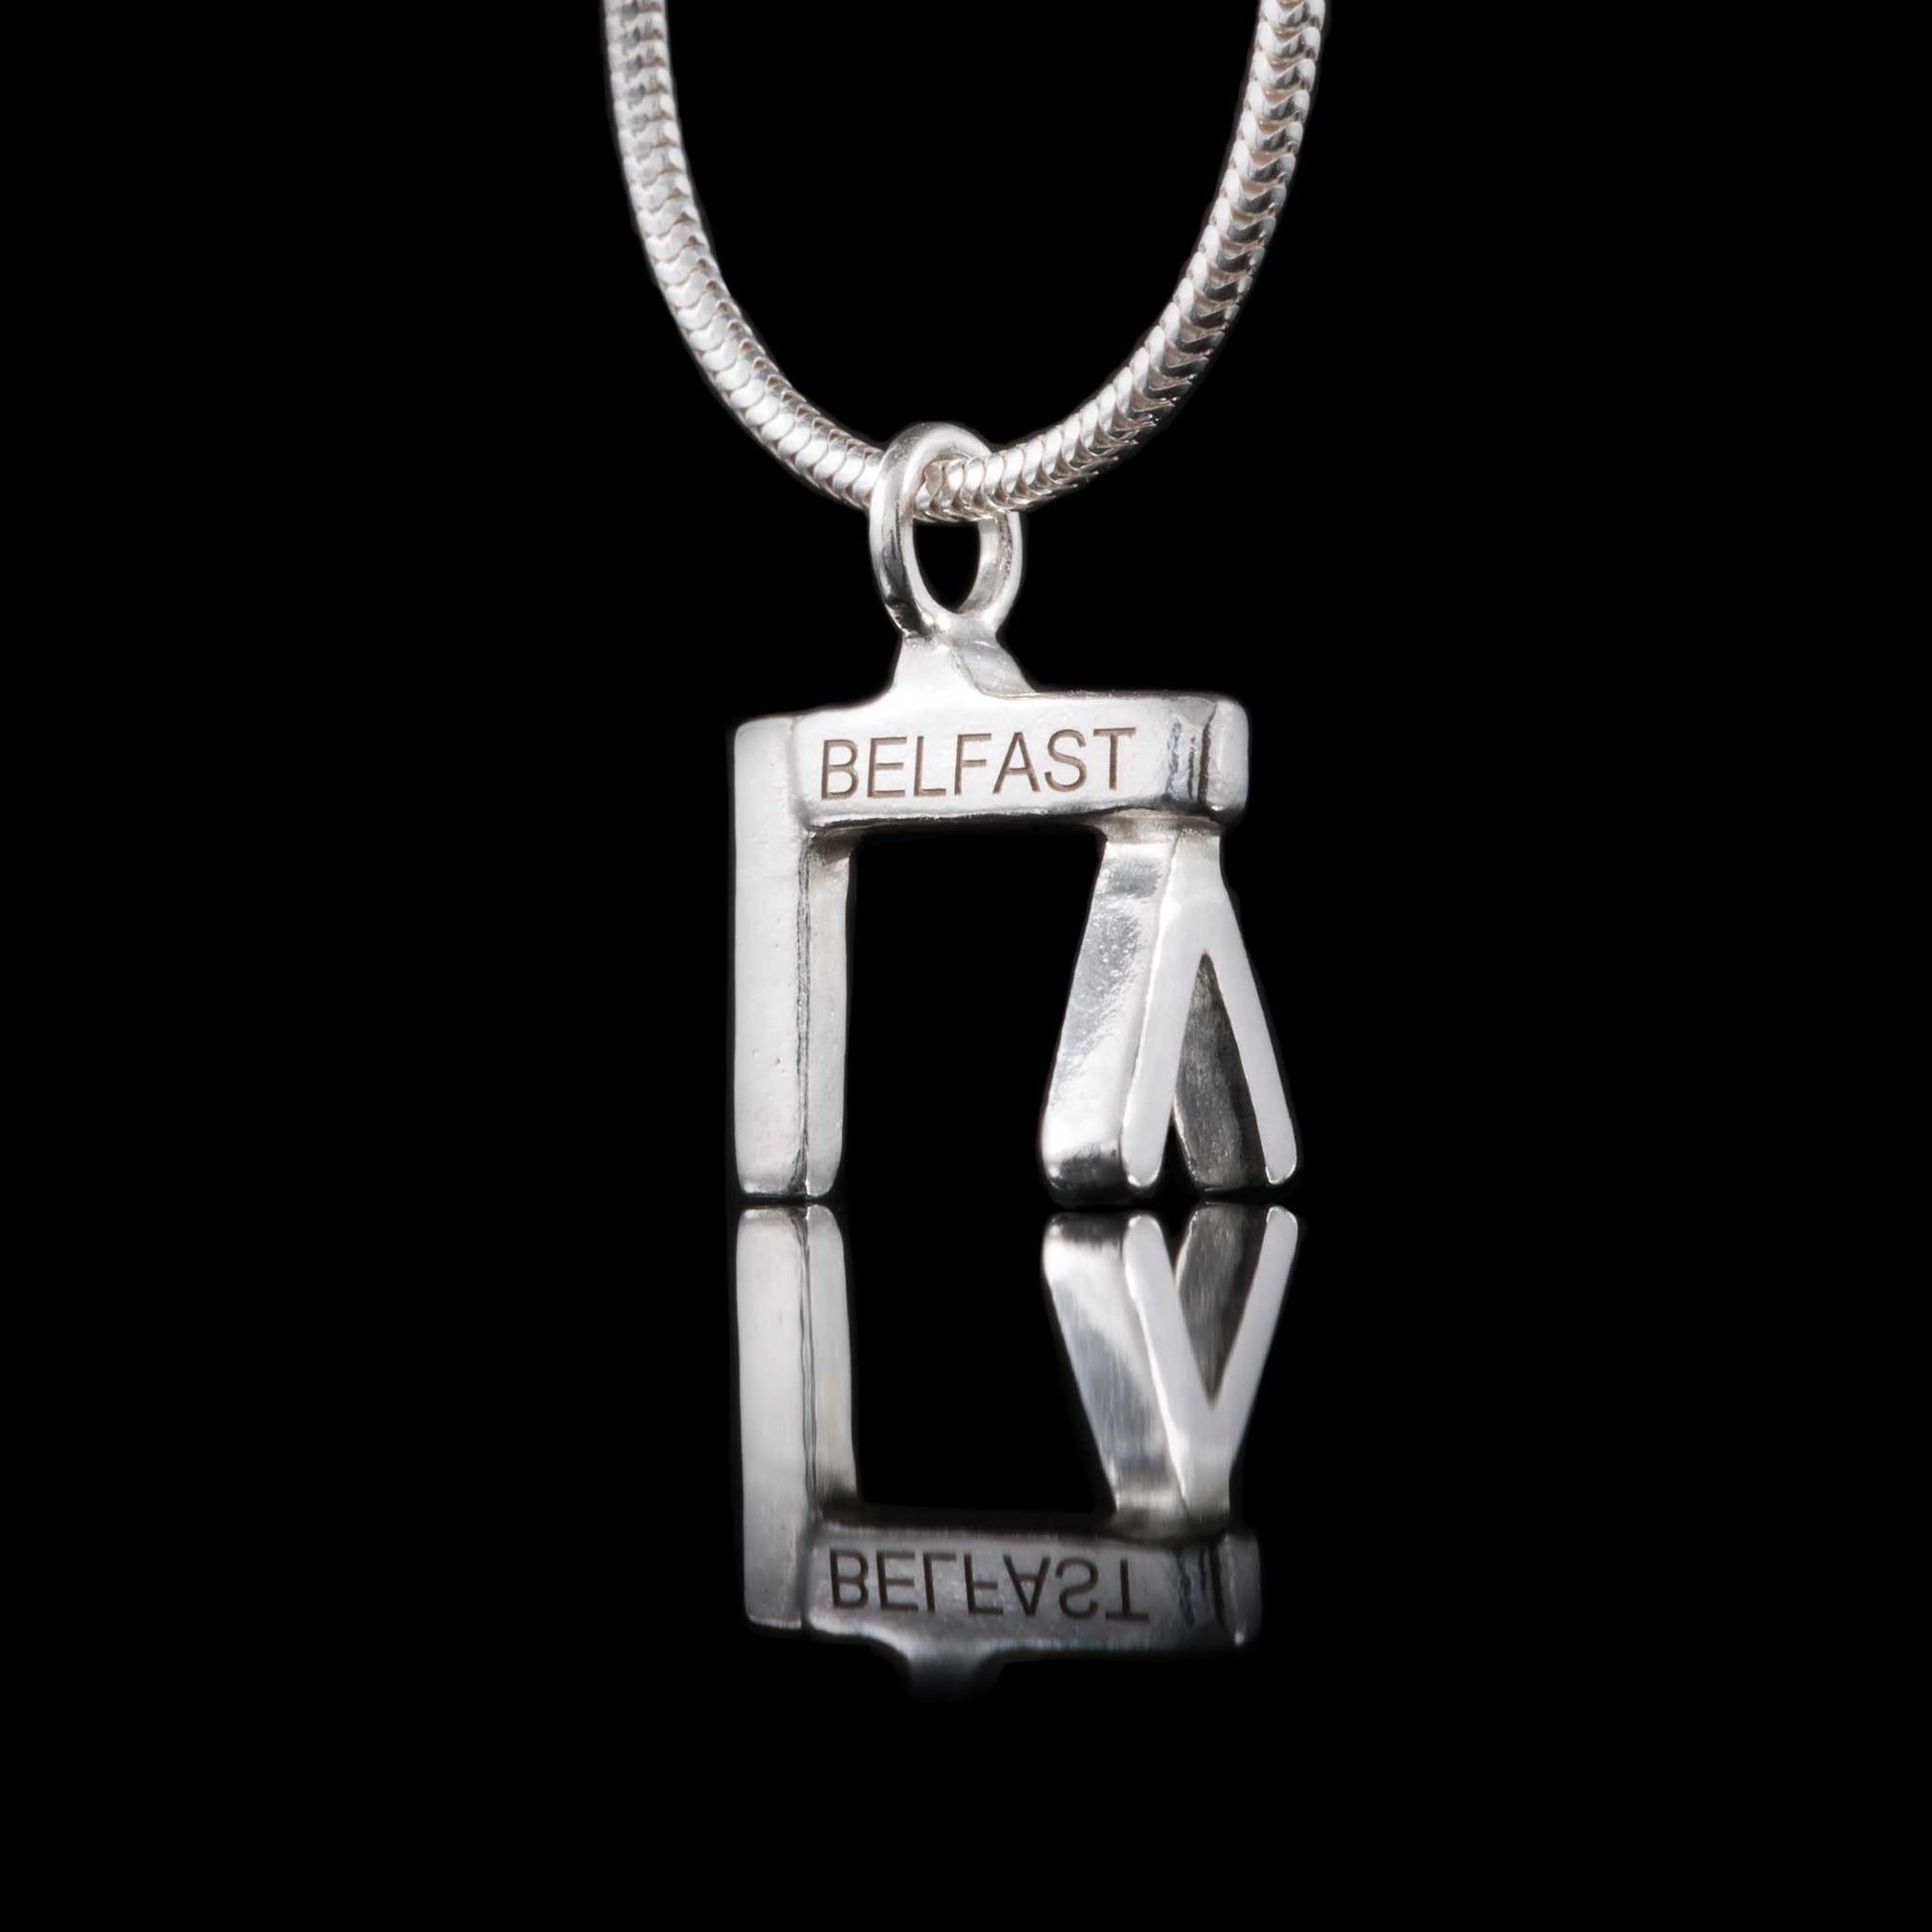 Belfast Crane Silver Necklace. Famous tourist and local landmark that can be worn for everyday or special occasions. Also great as a gift, which can be personalised, for engagements, weddings and special family days. Sterling Silver Personalised Pendant